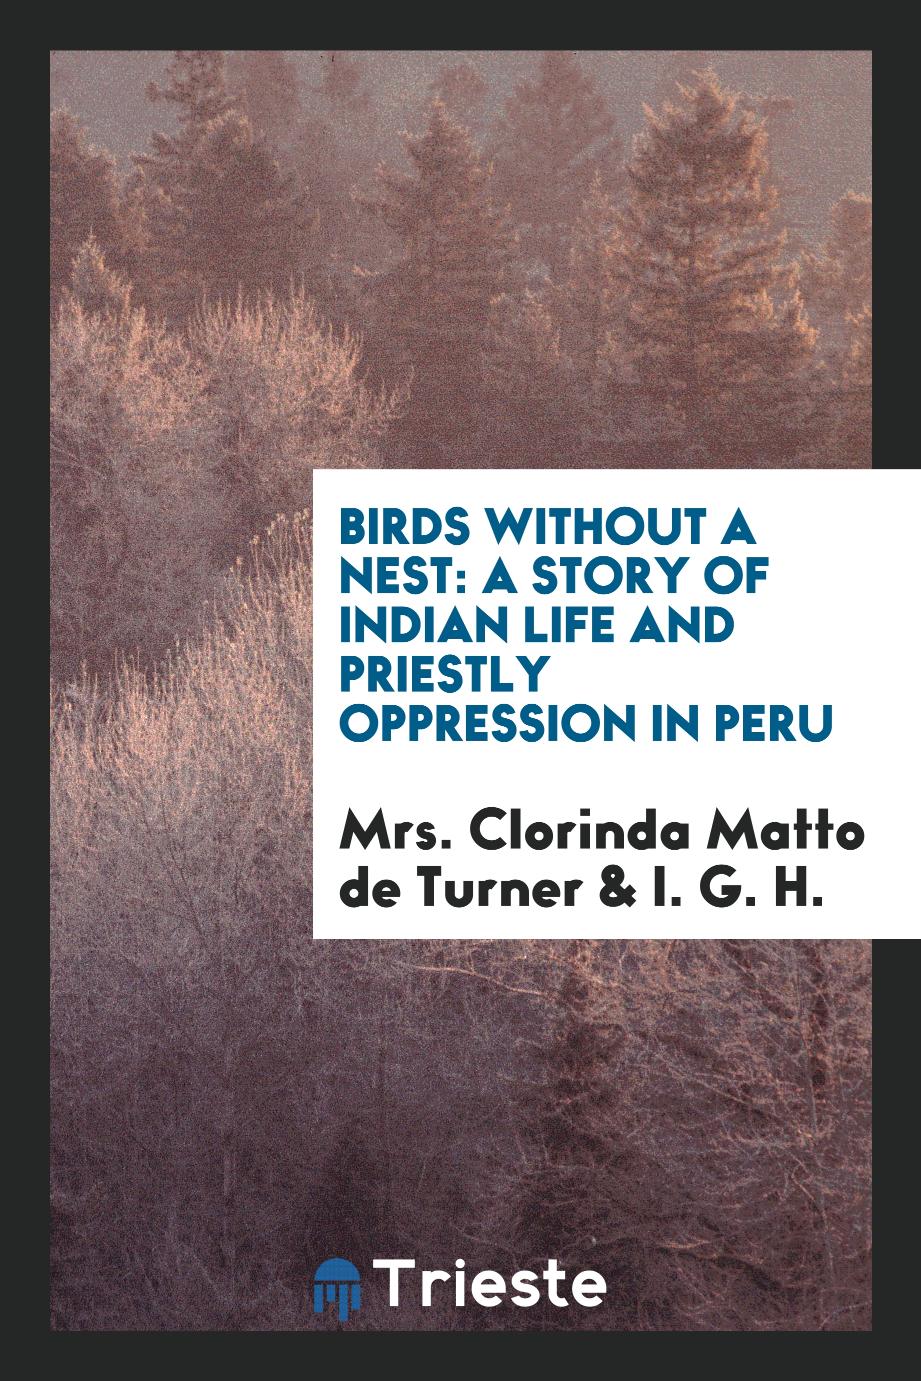 Birds Without a Nest: A Story of Indian Life and Priestly Oppression in Peru